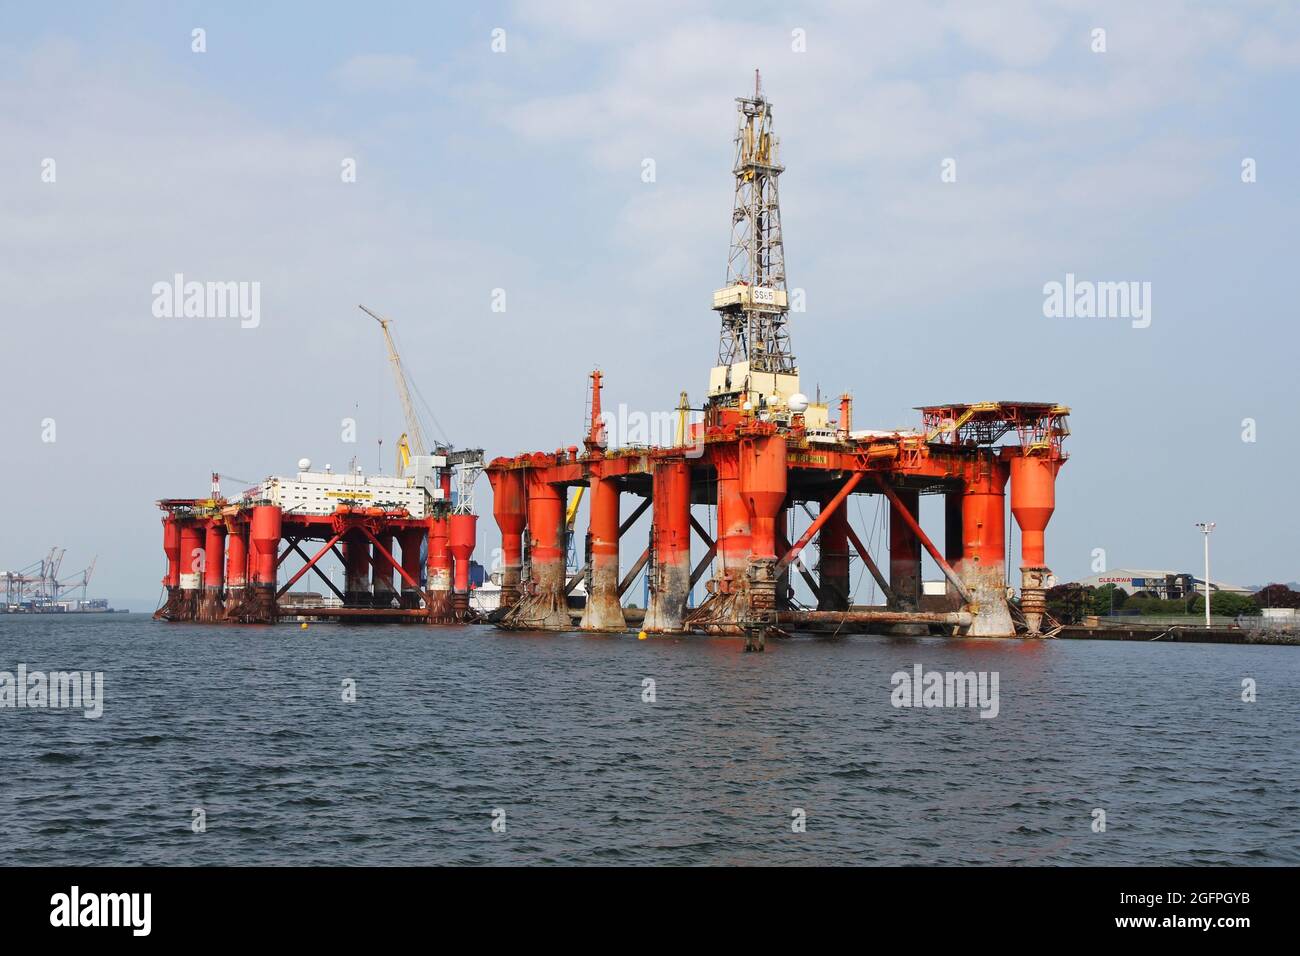 The drilling rig 'Borgny Dolphin' and accomodation platform 'Borgholm Dolphin' moored in Belfast harbour, Northern Ireland, UK Stock Photo